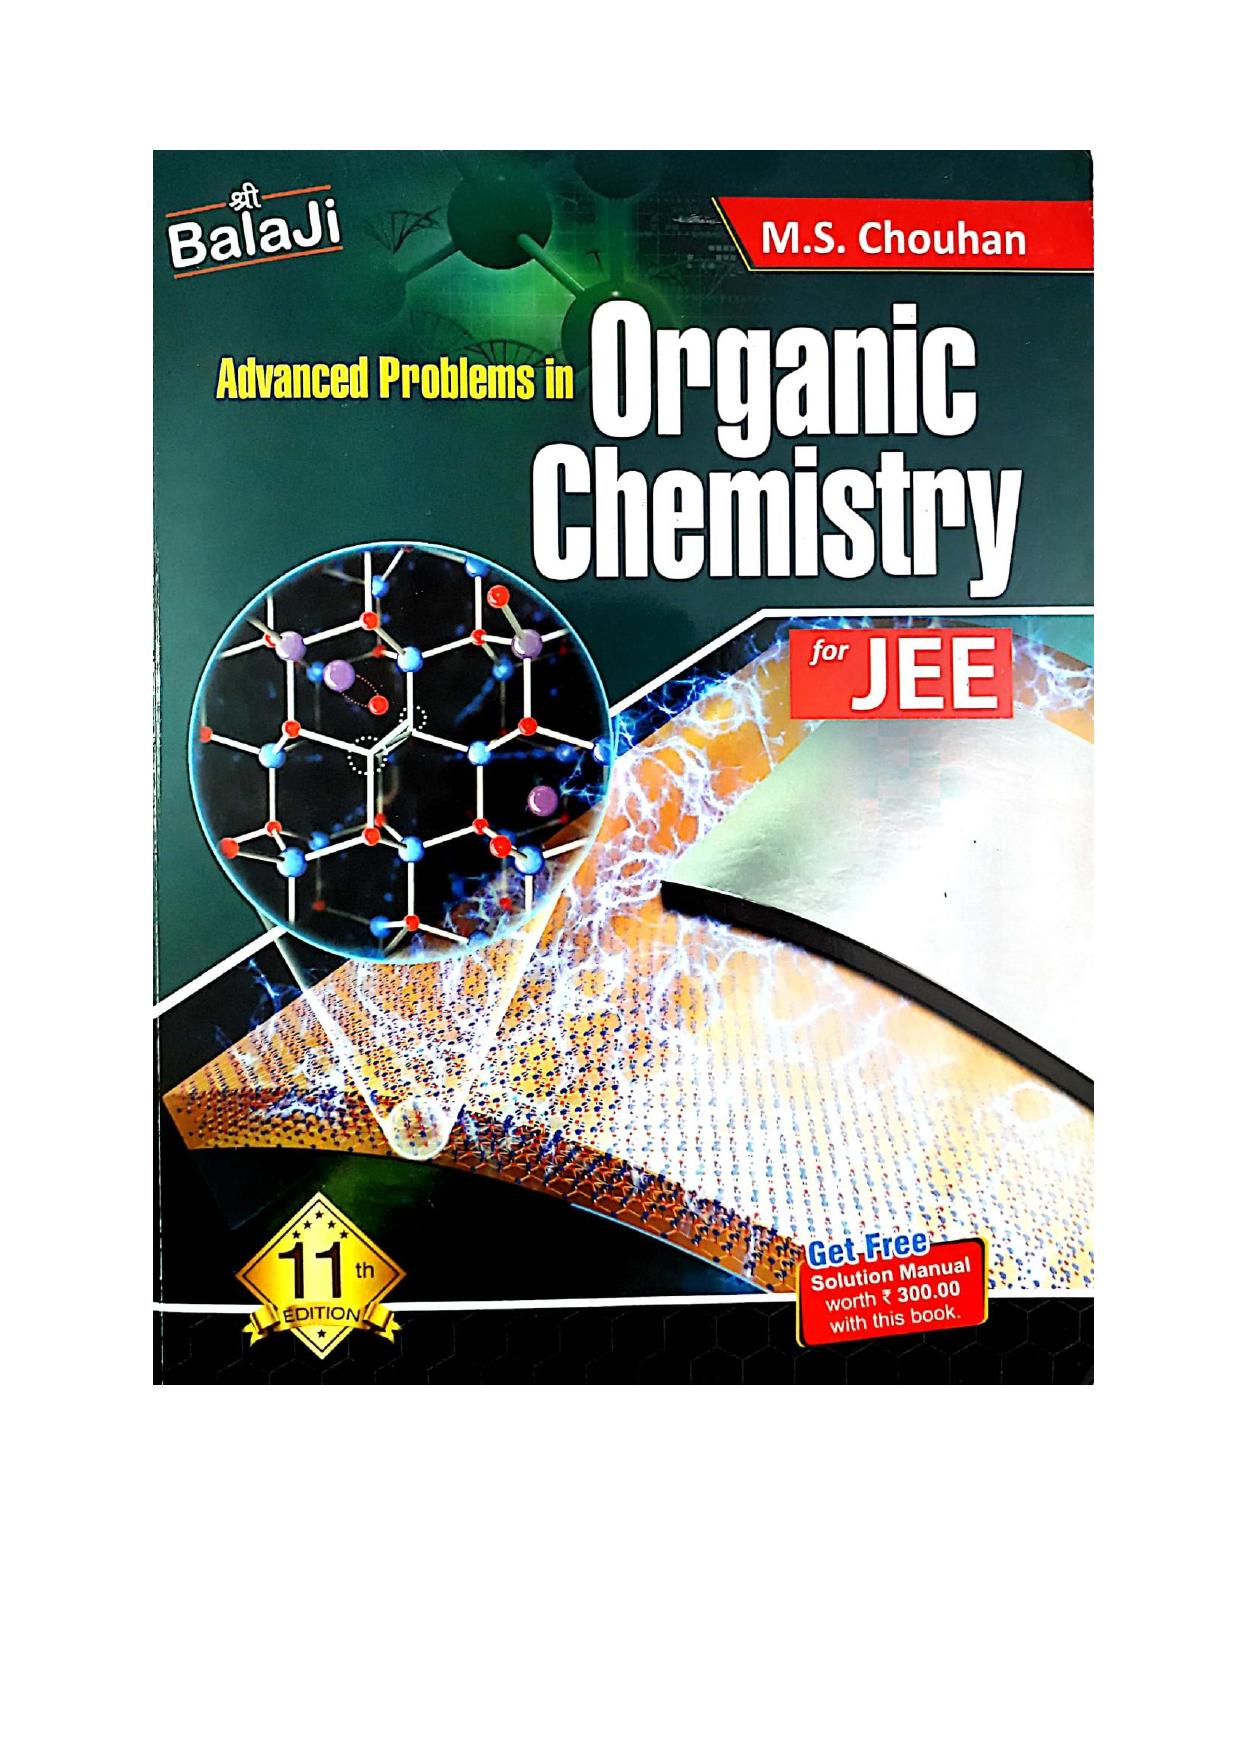 Balaji Advanced Problems in Organic Chemistry Part 1 upto page 240 by M S Chouhan for IIT JEE main advanced 2019